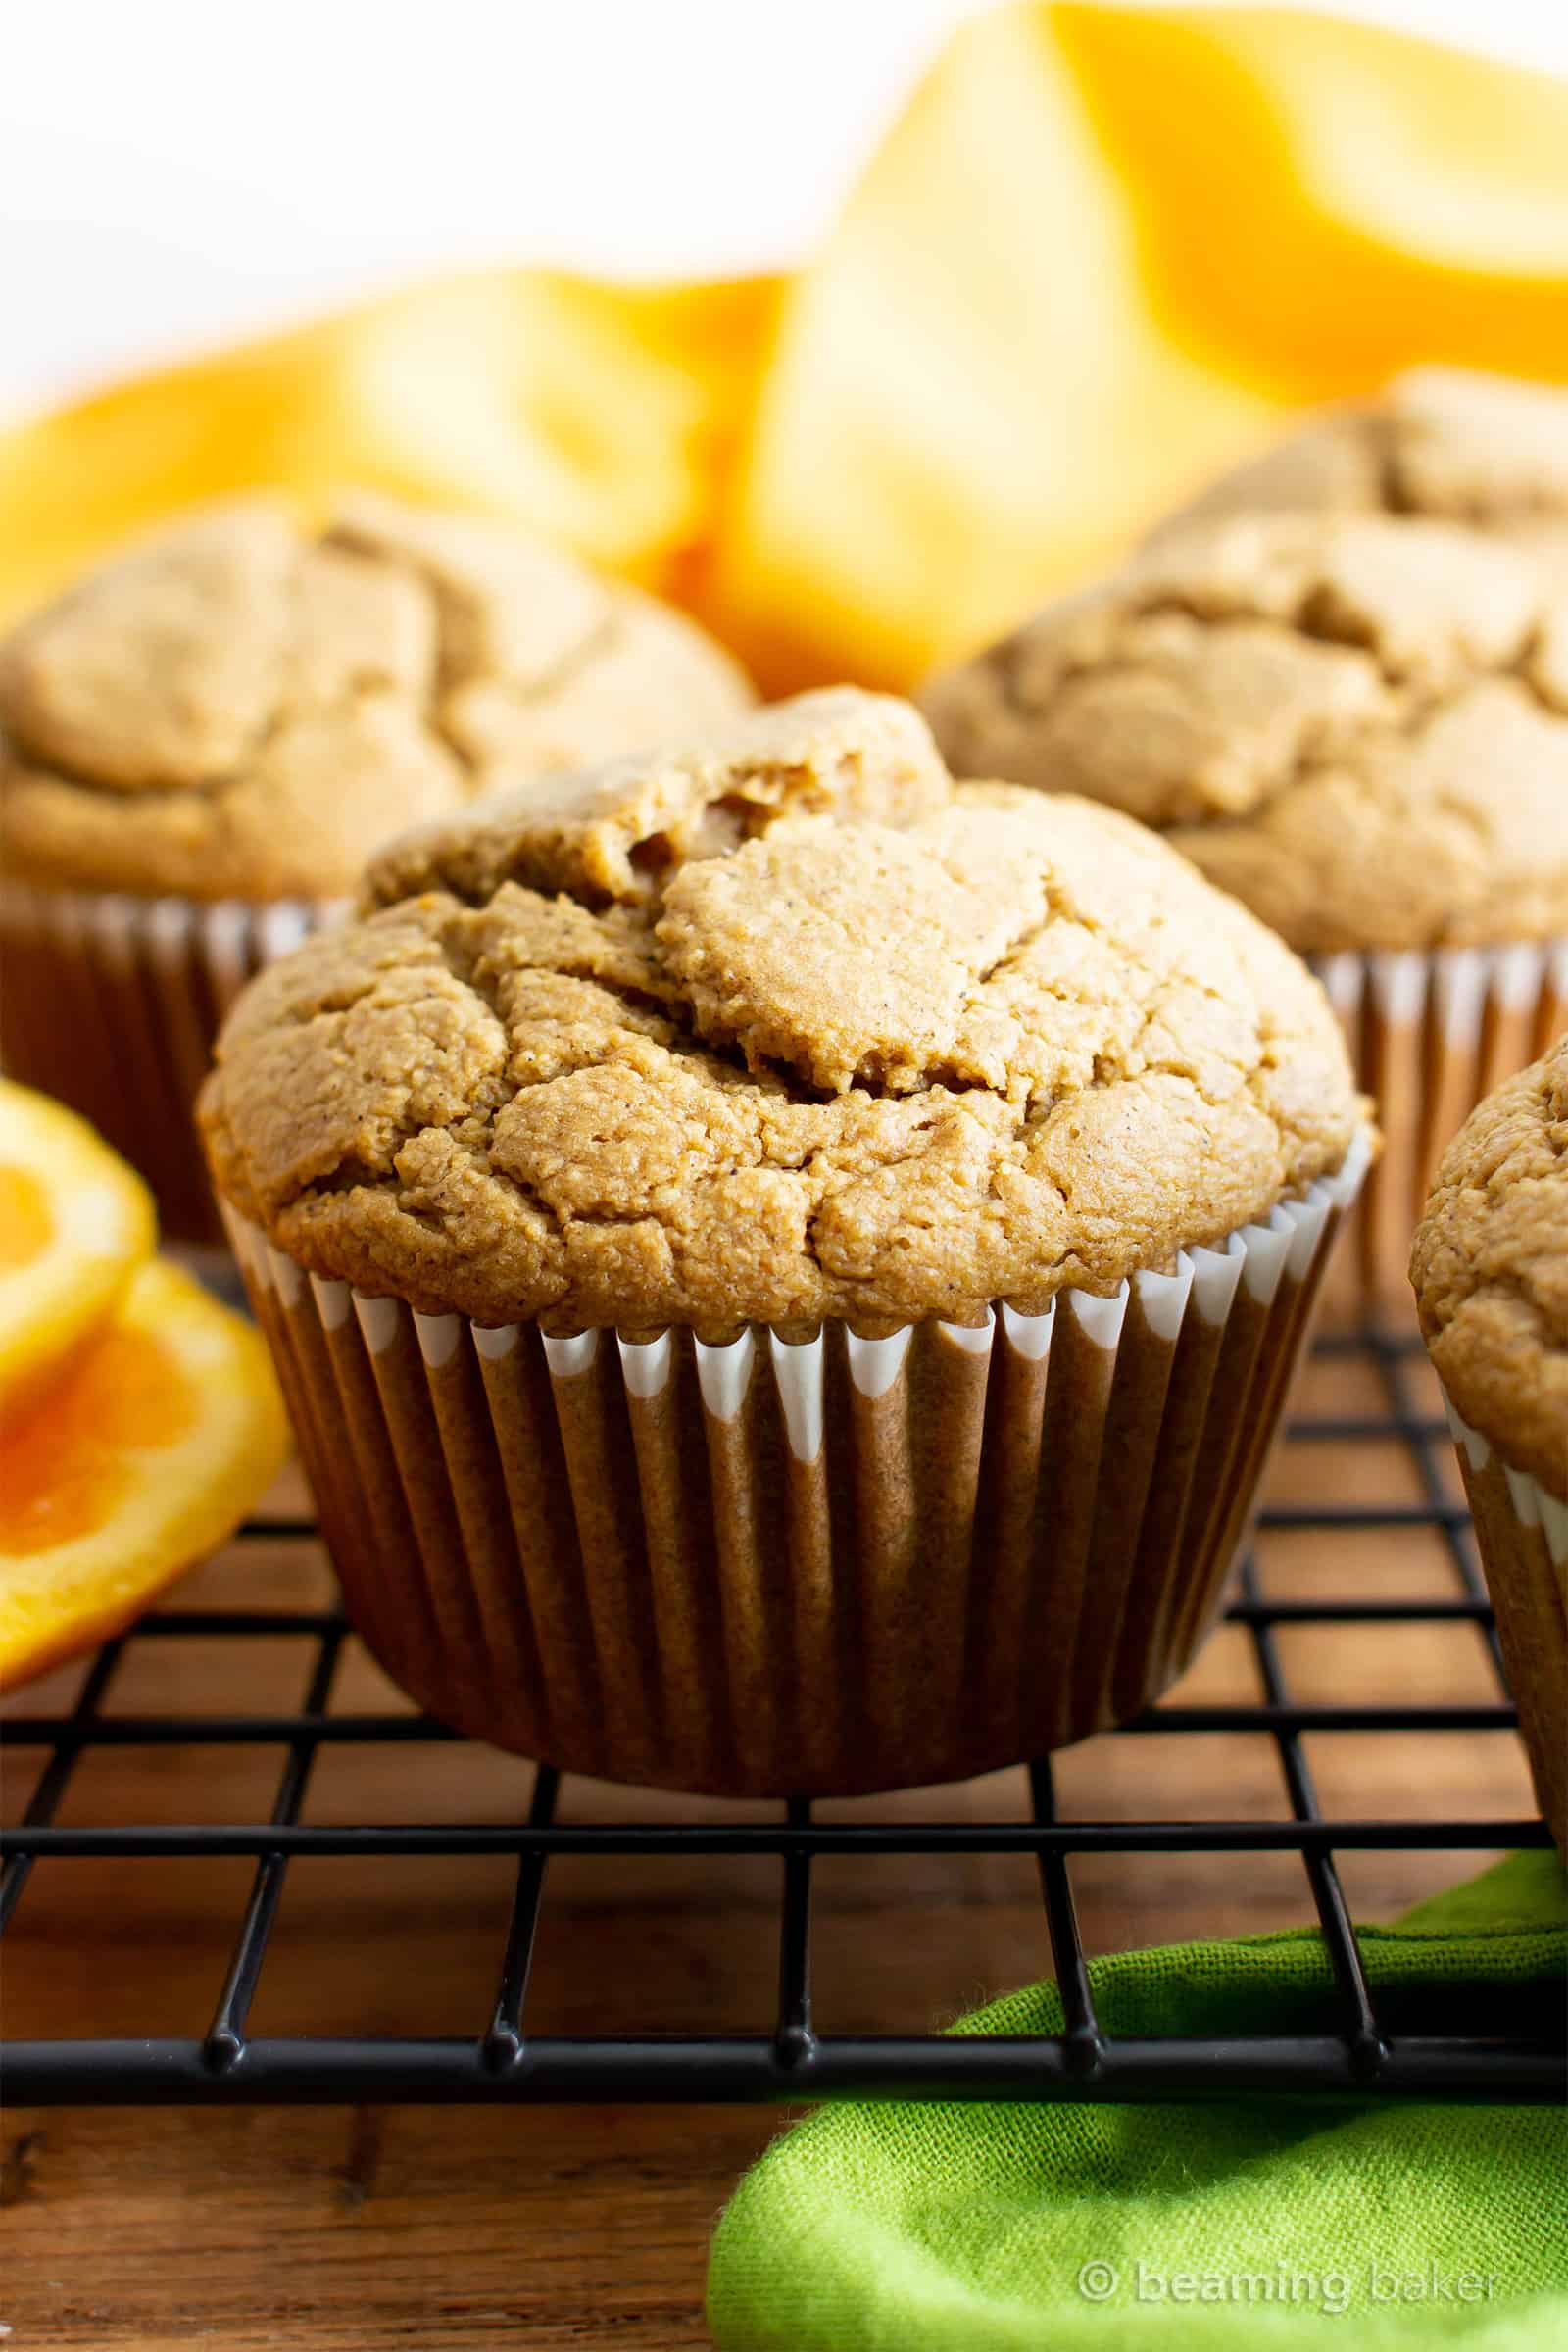 Healthy Gluten Free Orange Cardamom Muffins Recipe (V, GF): an easy, 1-bowl recipe for soft, fluffy orange muffins with a hint of delicious cardamom flavor. Made with healthy ingredients. #Vegan #GlutenFree #DairyFree #HealthyMuffins #GlutenFreeVegan #BeamingBaker | Recipe at BeamingBaker.com